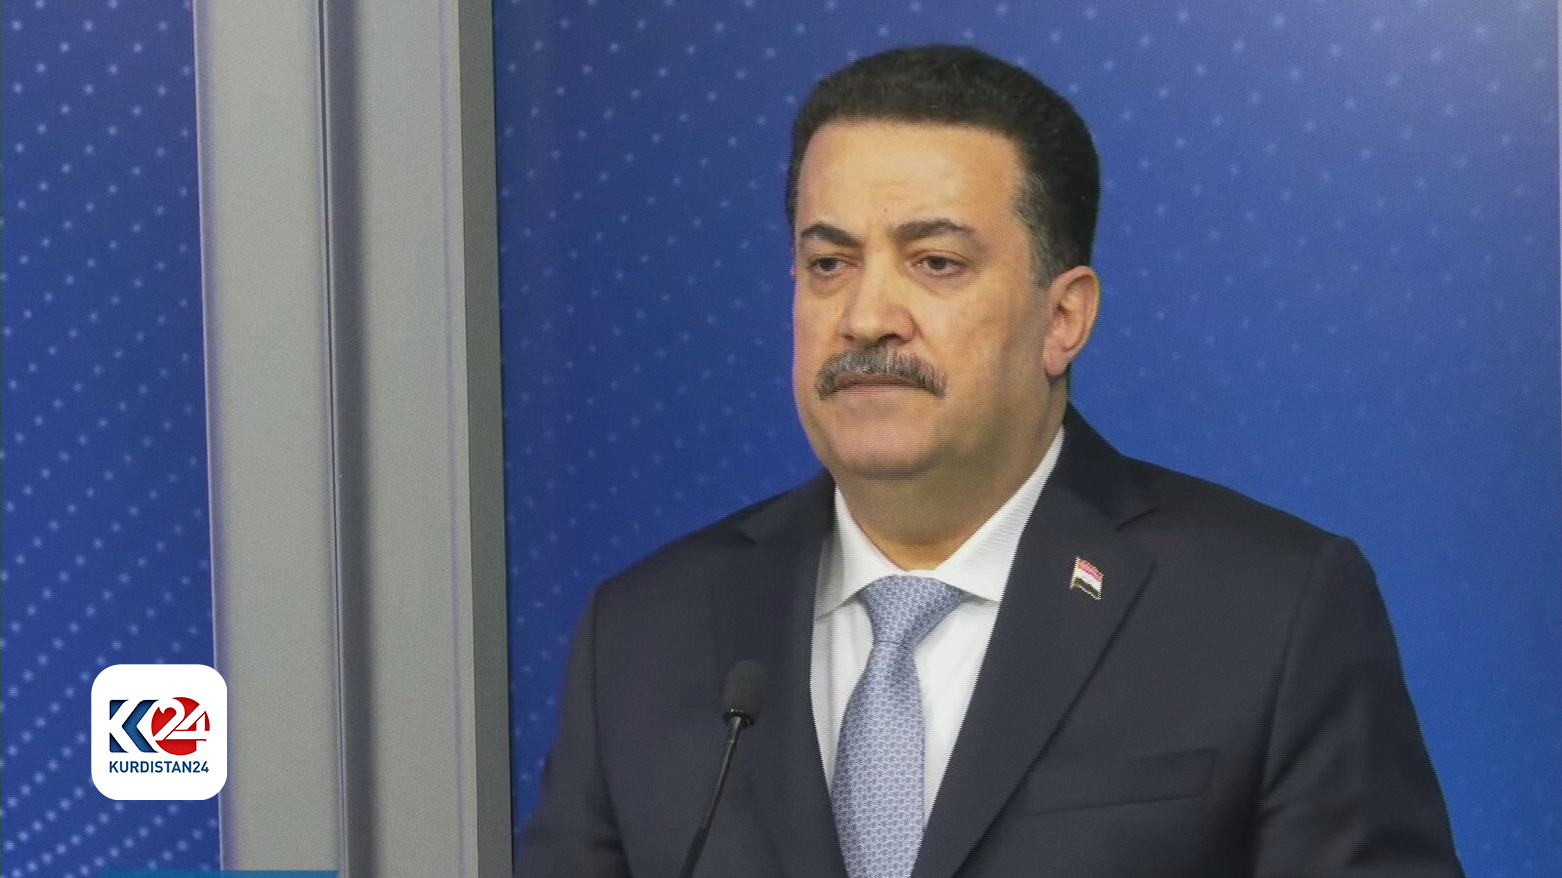 AlHalbousi and Masrour Barzani stress the necessity of resolving the outstanding problems